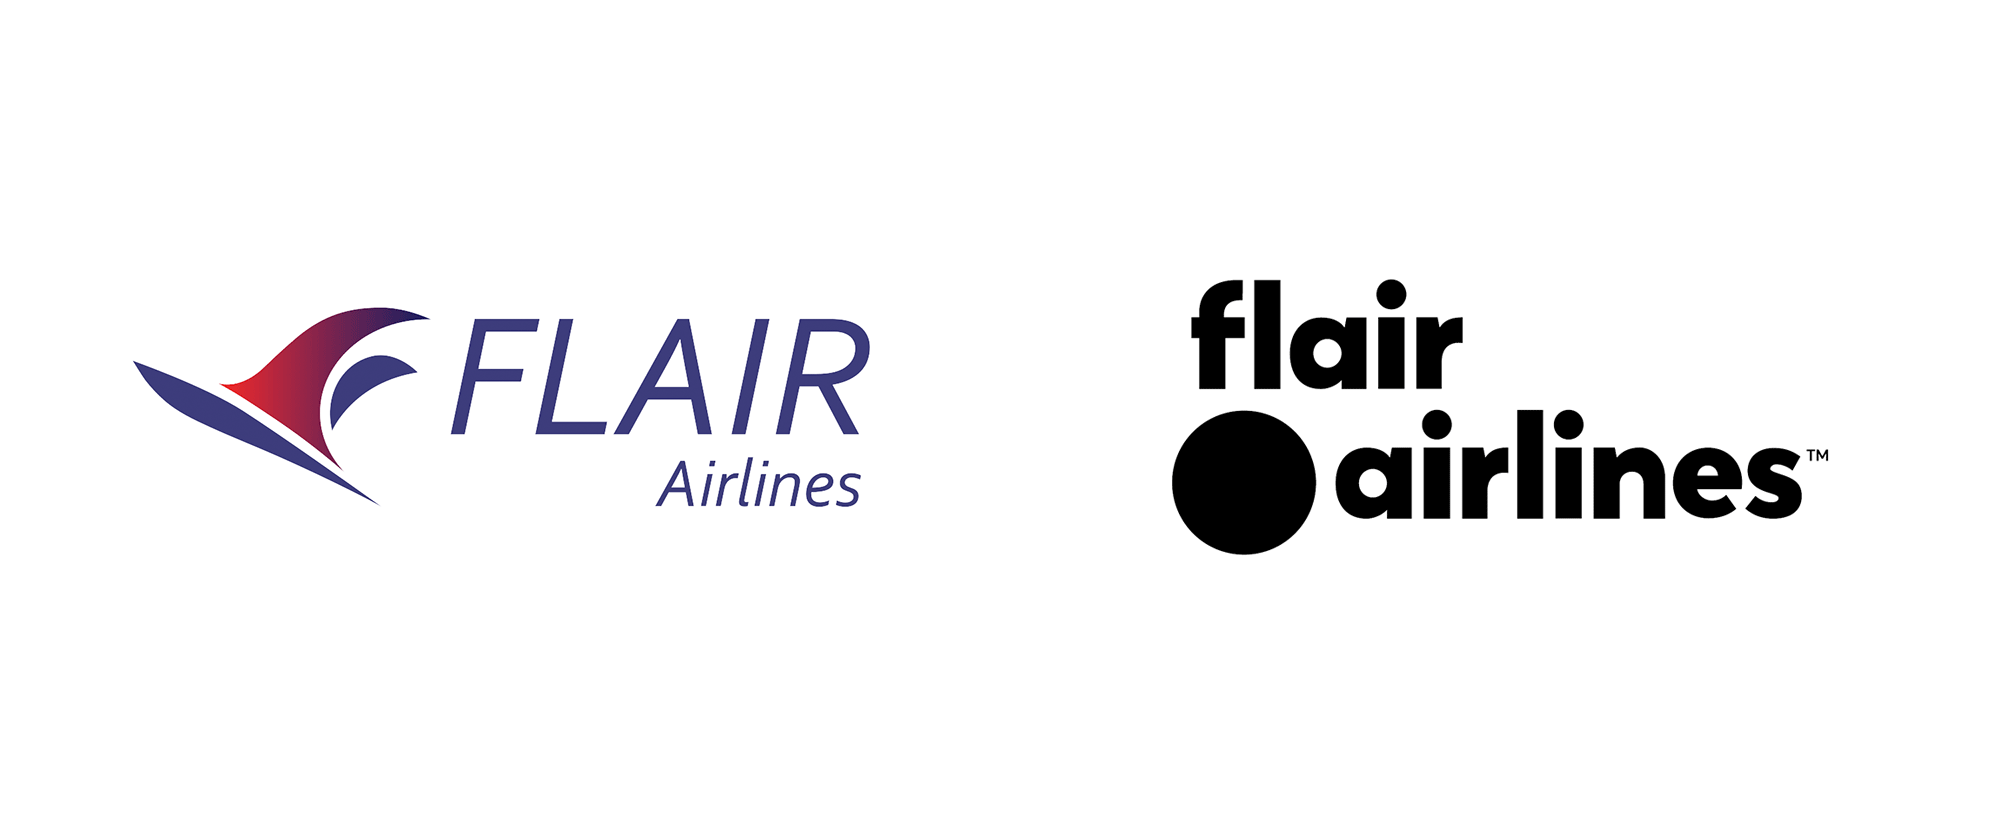 New Logo and Livery for Flair Airlines